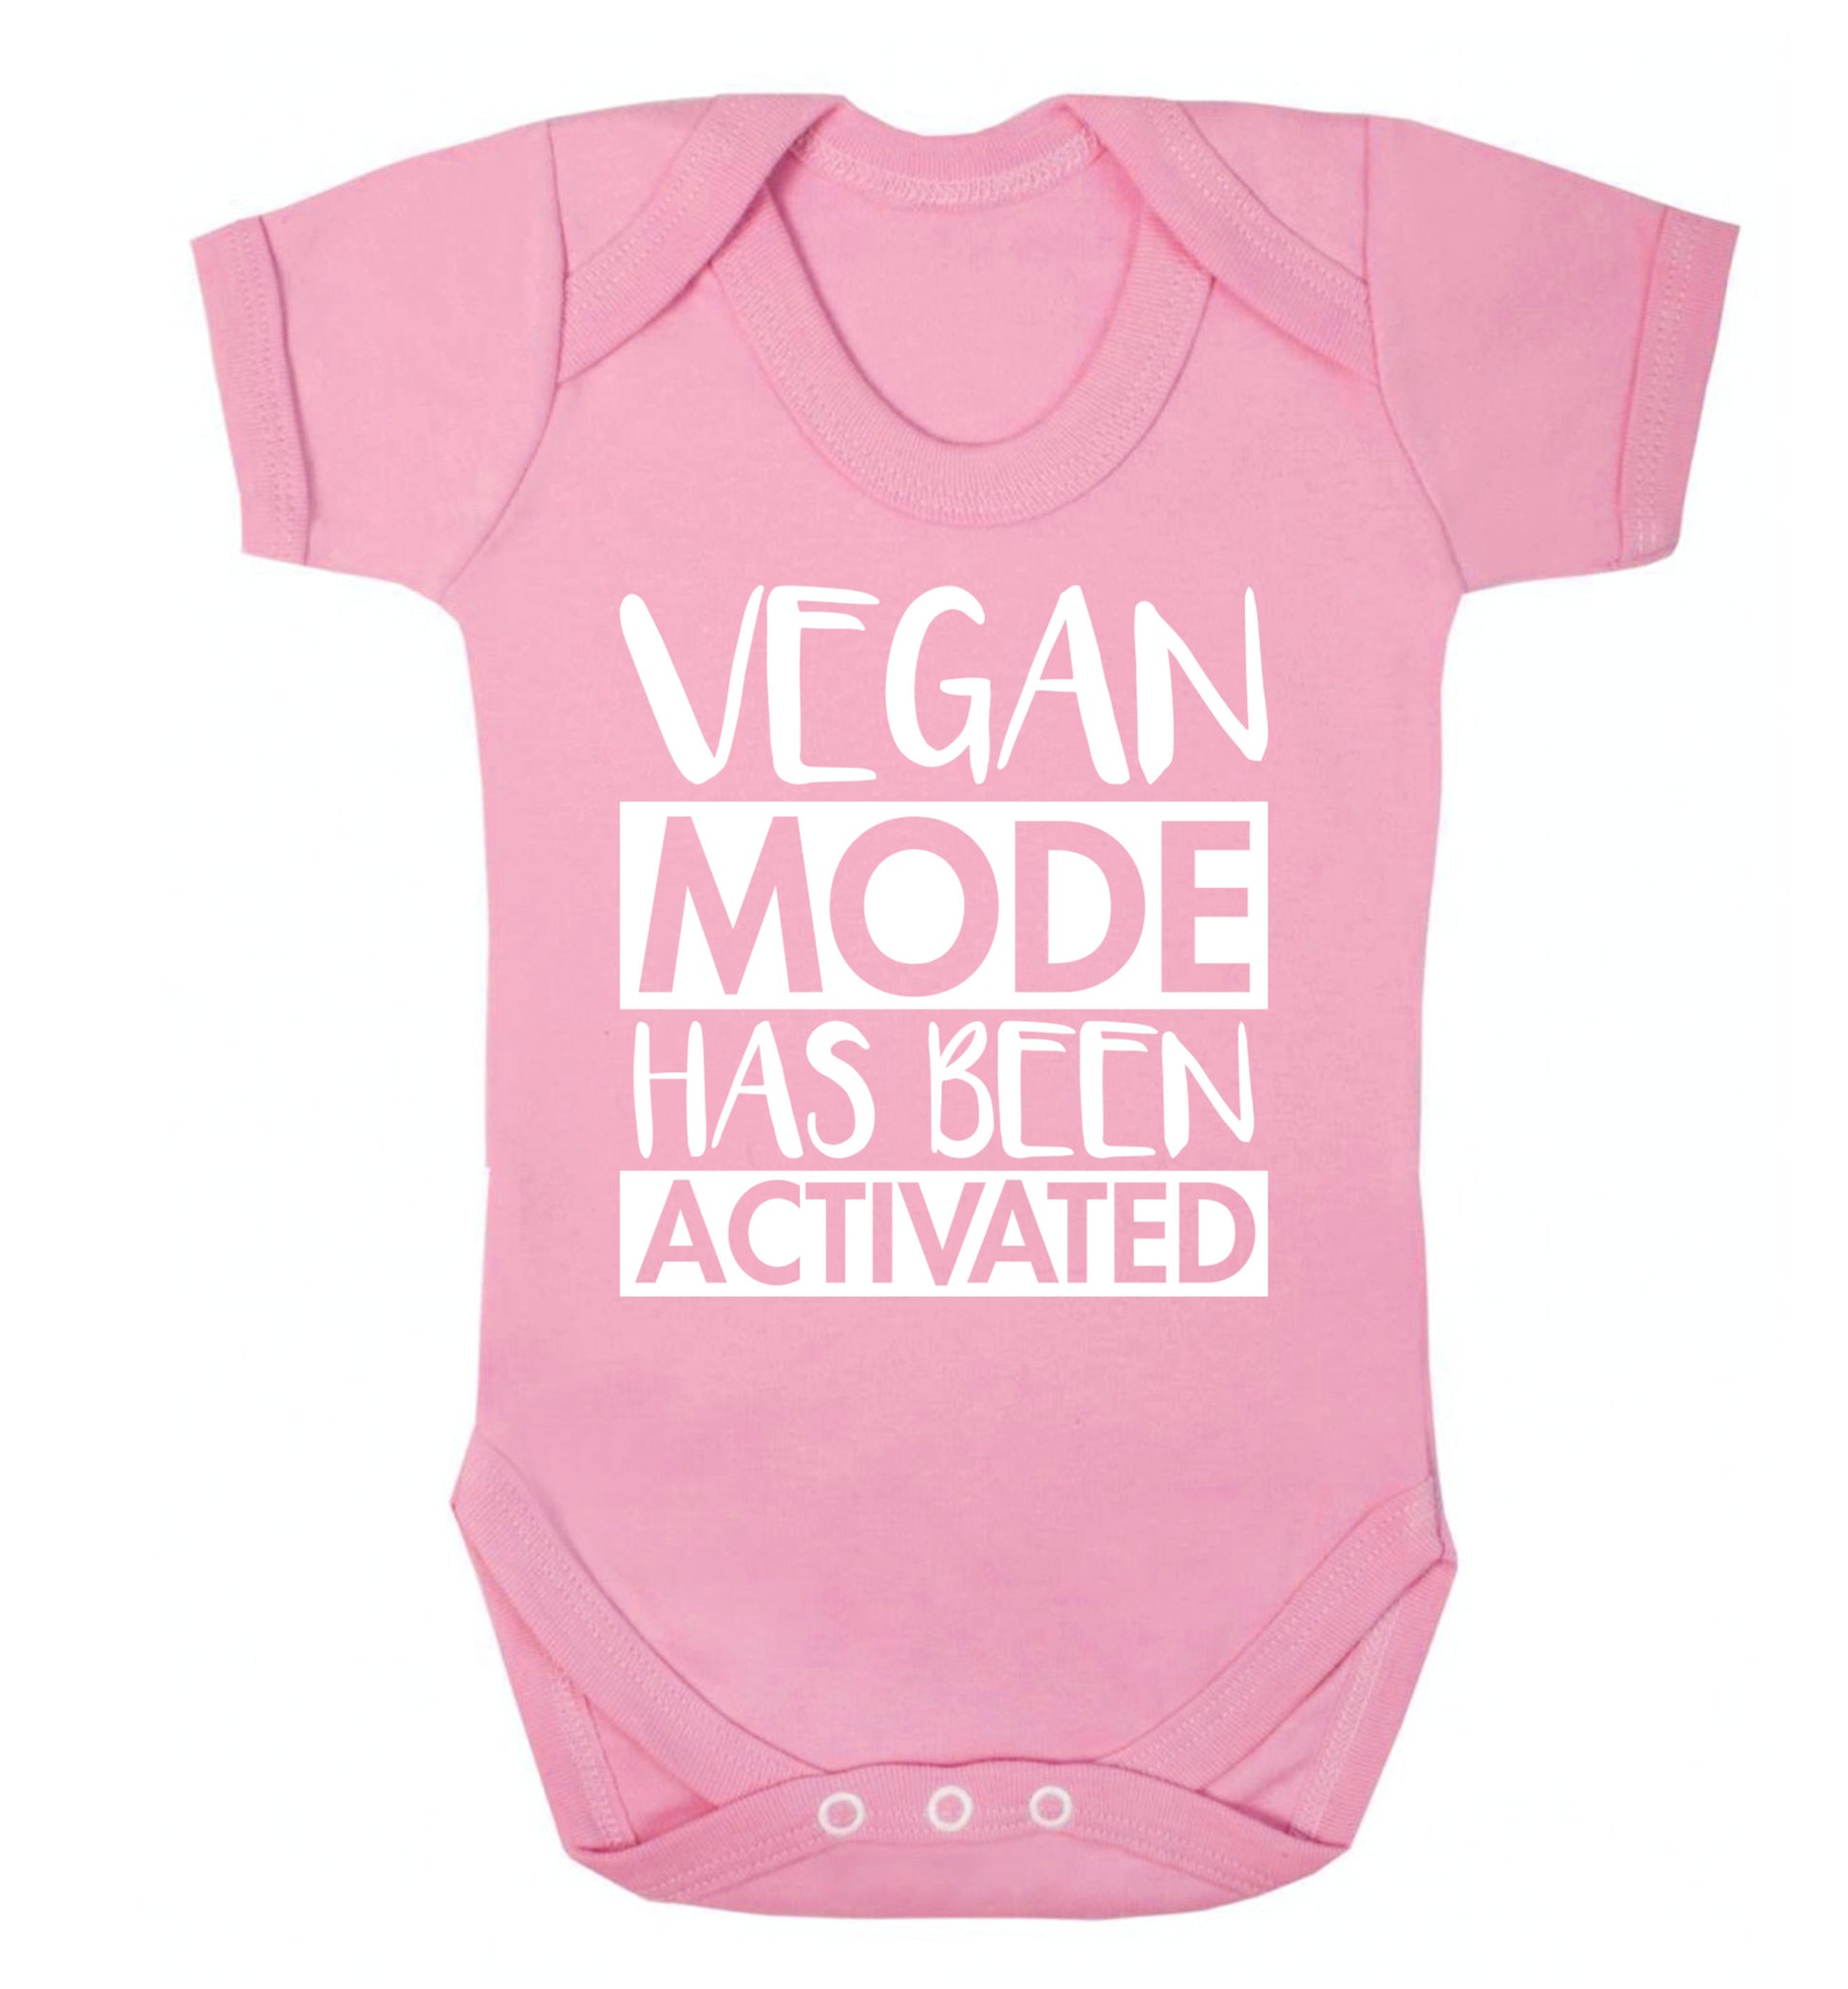 Vegan mode activated Baby Vest pale pink 18-24 months